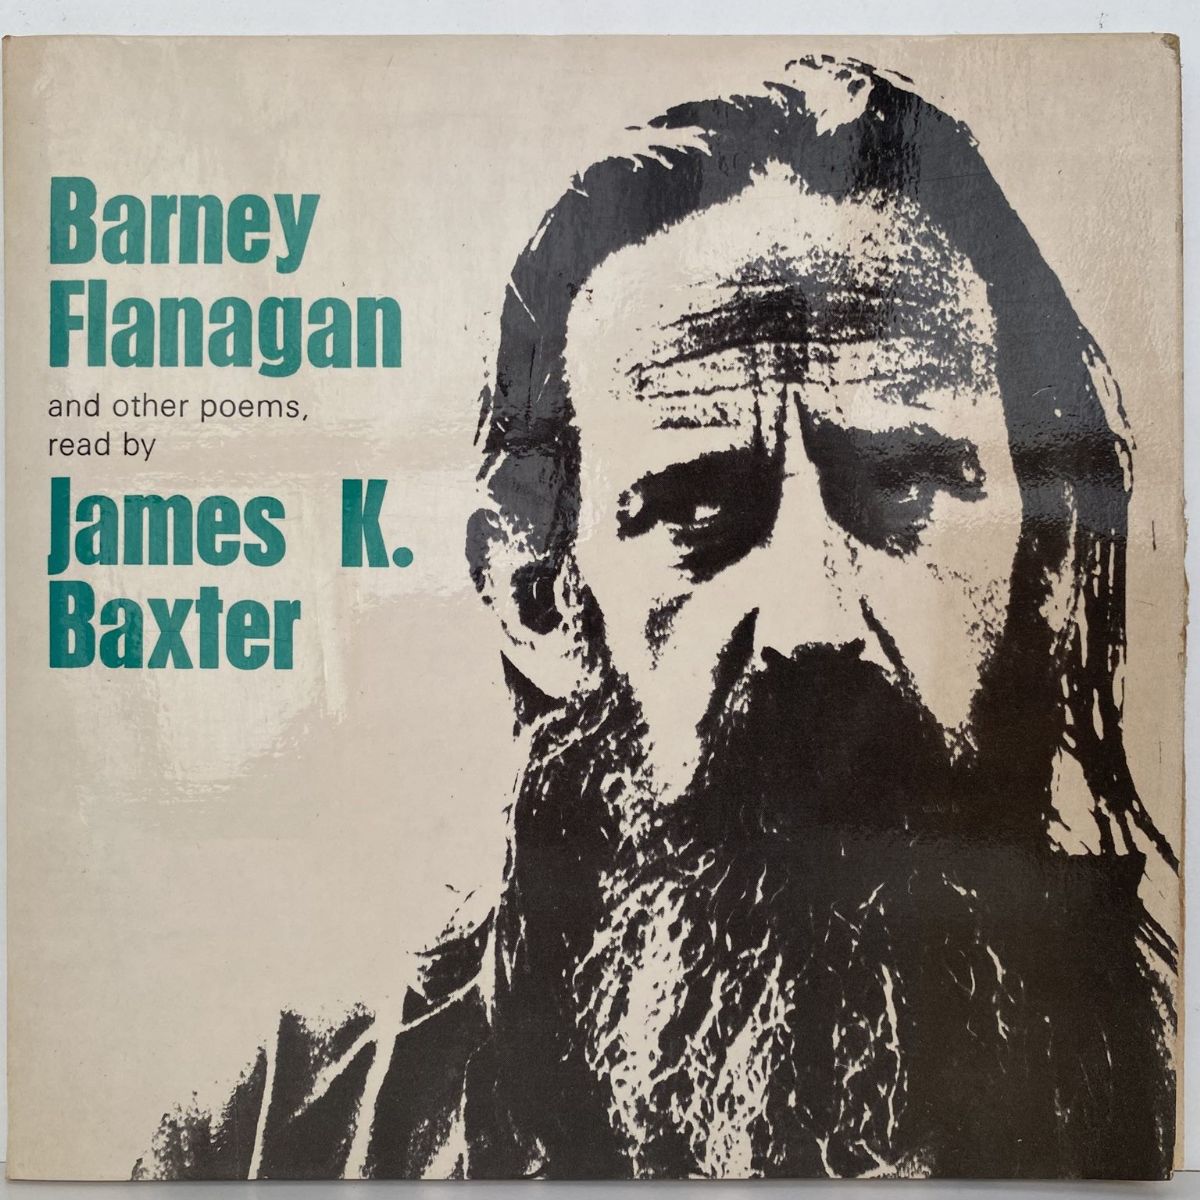 BARNEY FLANAGAN and other poems ready by James K. Baxter